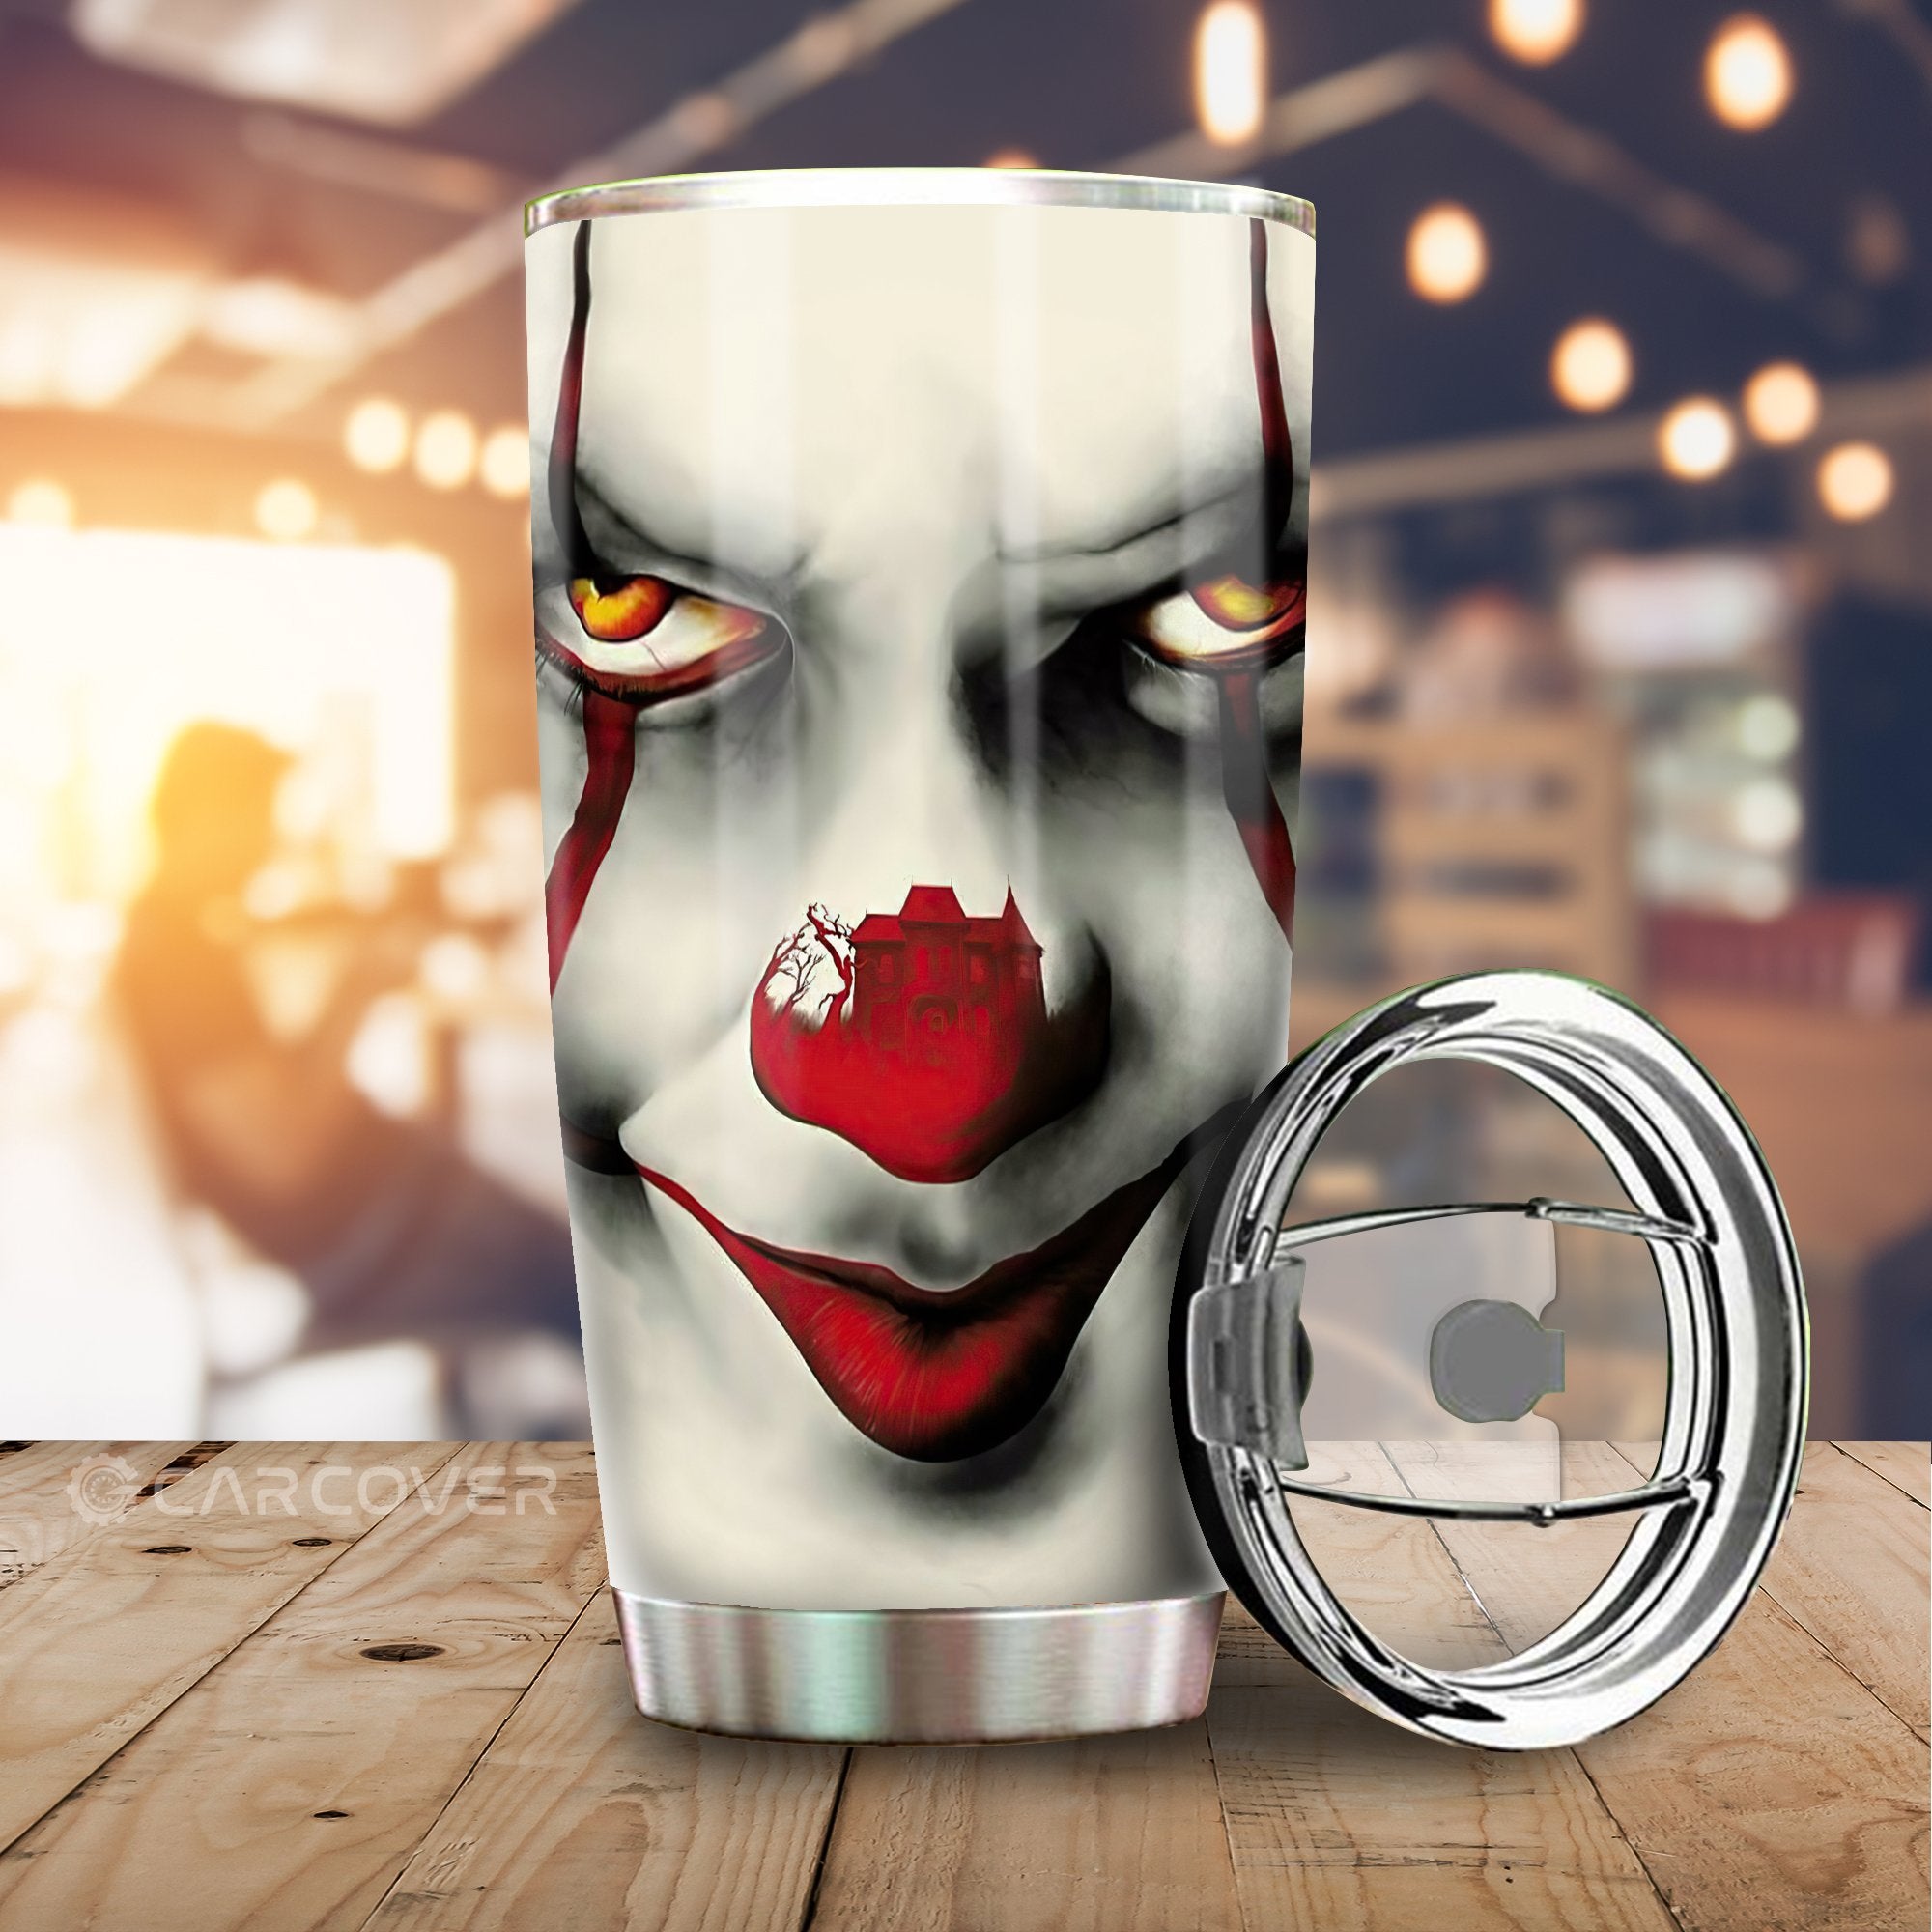 Pennywise Tumbler Cup Custom IT Clown Face Car Accessories Horror Halloween Decorations - Gearcarcover - 1